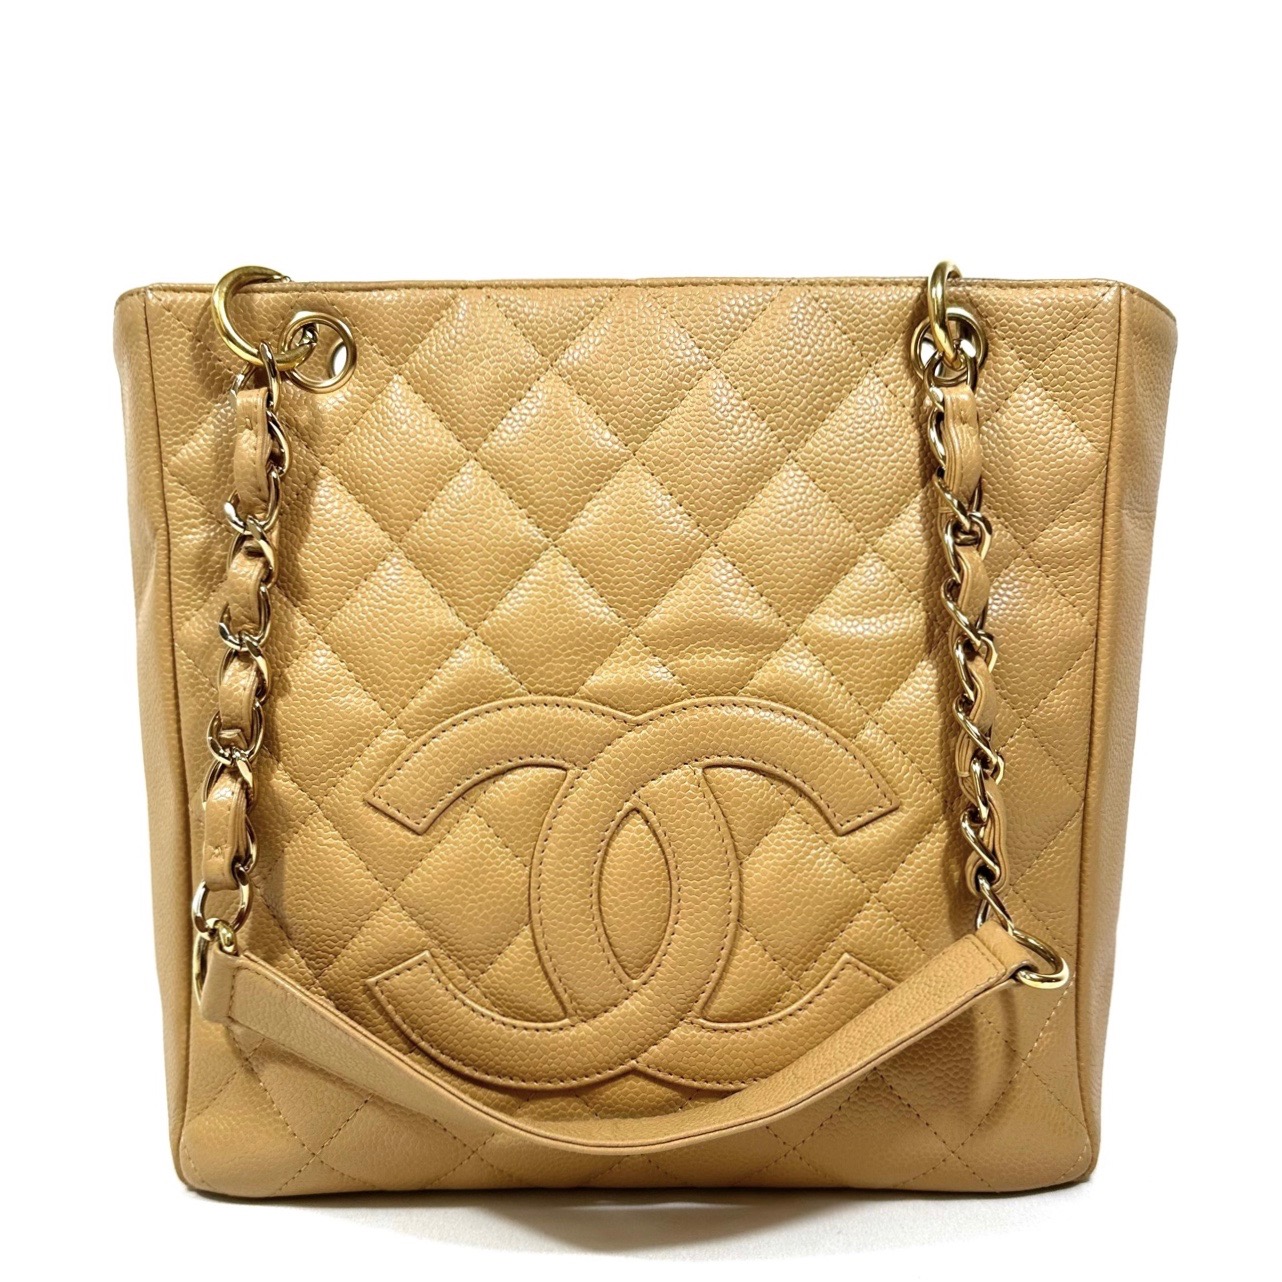 CHANEL PETITE SHOPPING TOTE BAG IN BEIGE CAVIAR LEATHER - Still in